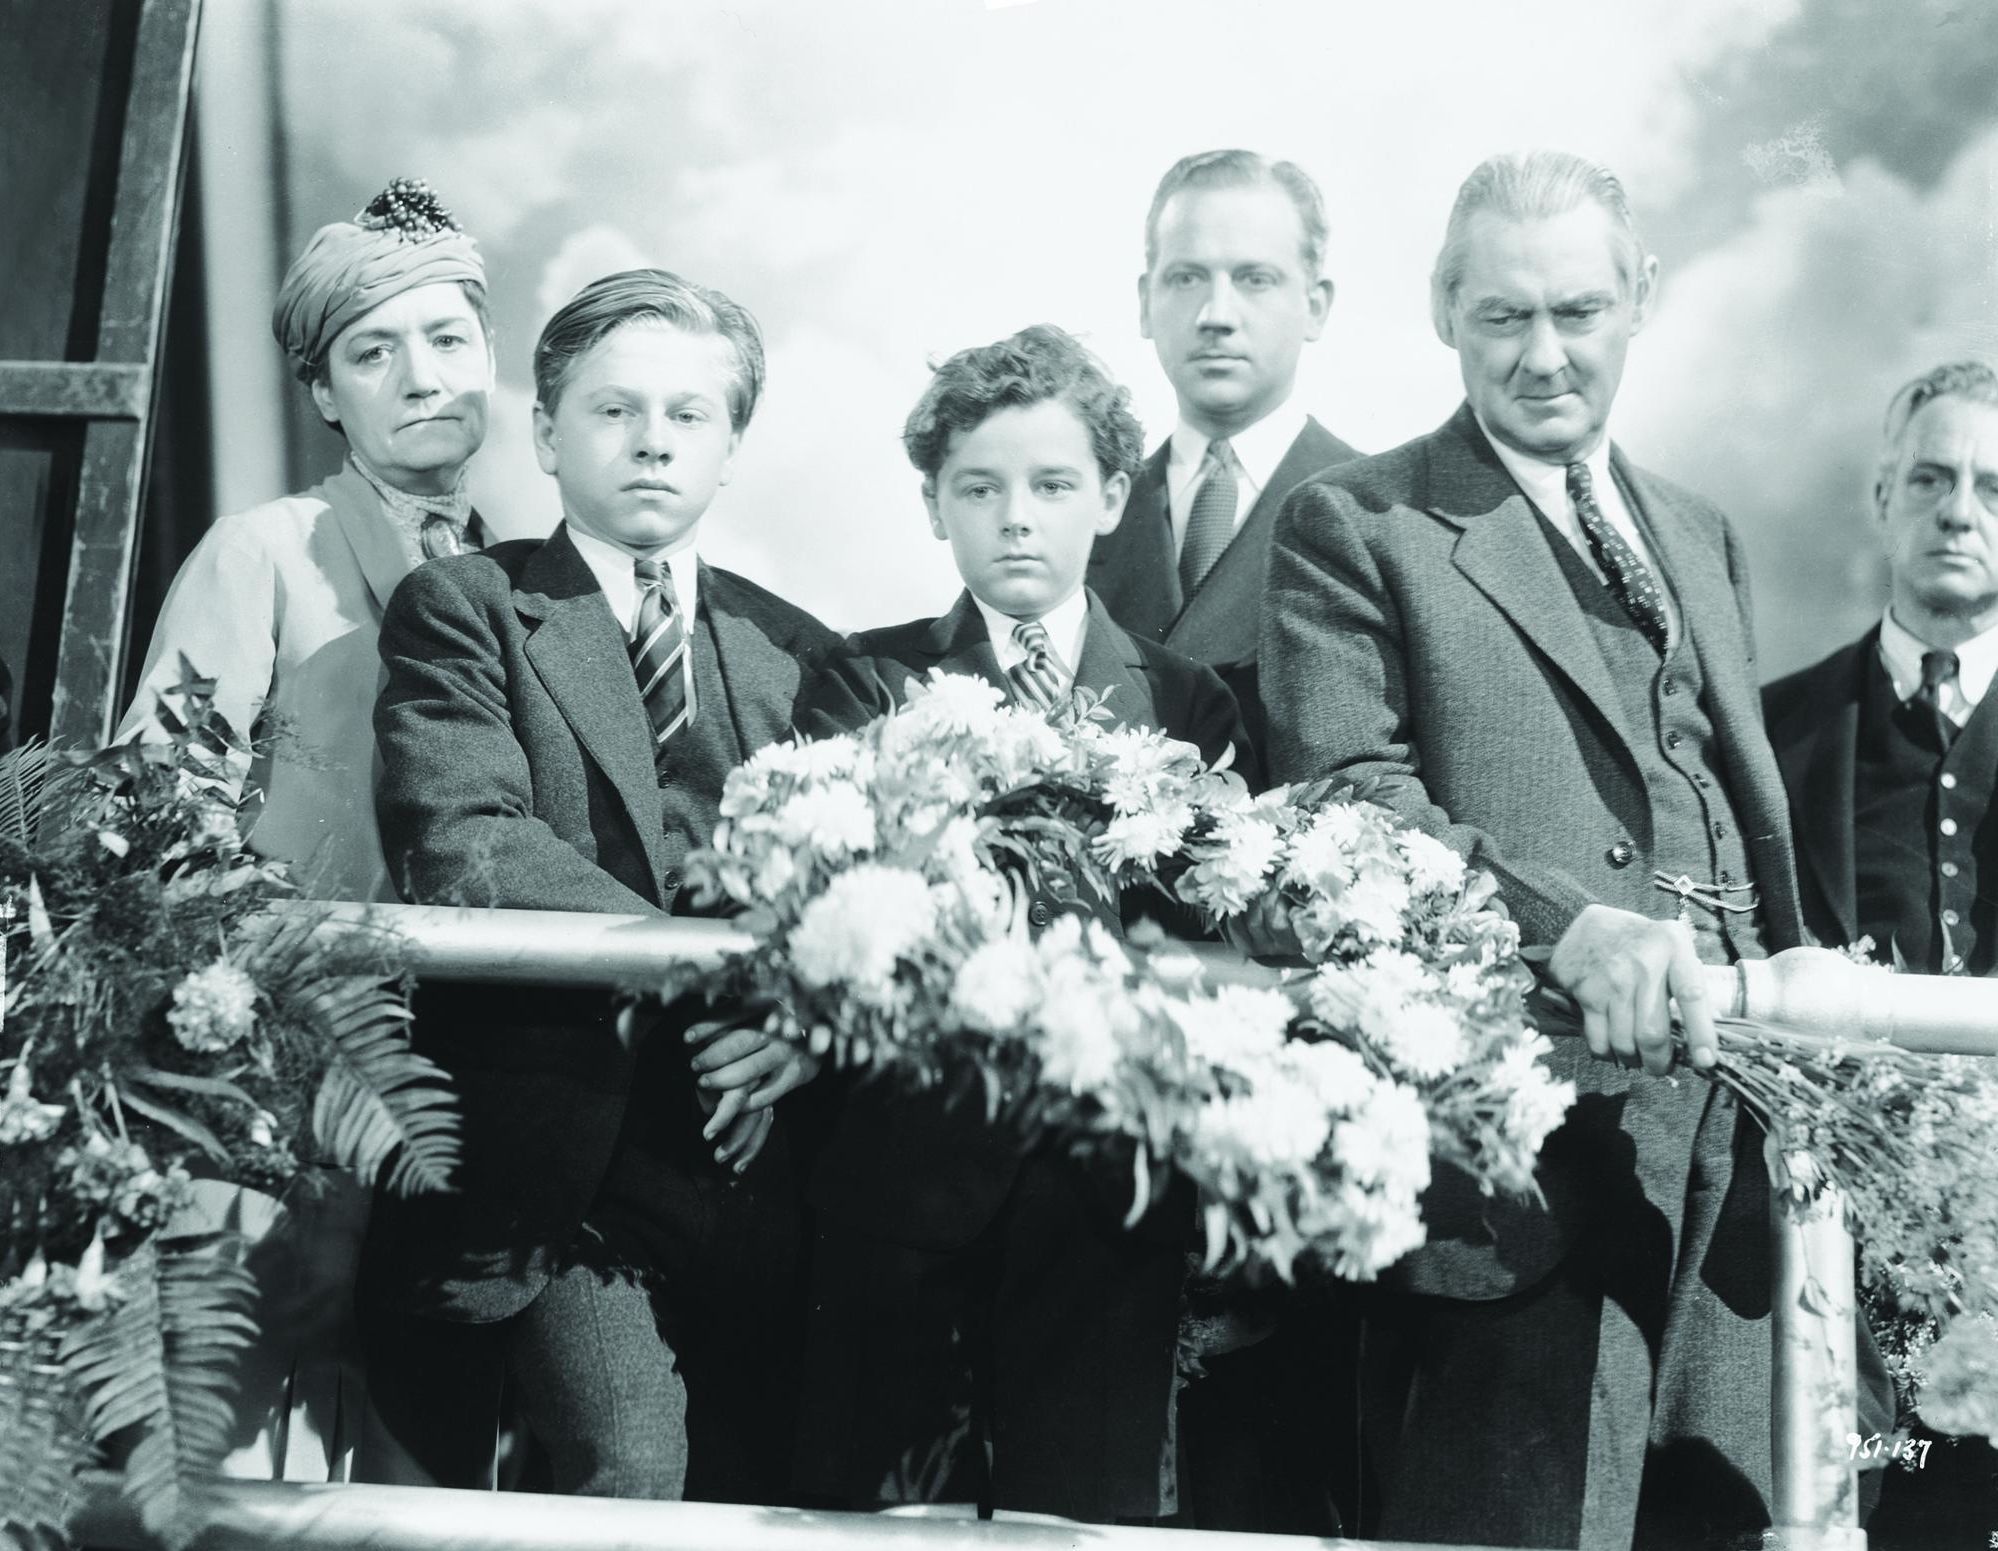 Still of Lionel Barrymore, Freddie Bartholomew, Mickey Rooney and Melvyn Douglas in Captains Courageous (1937)